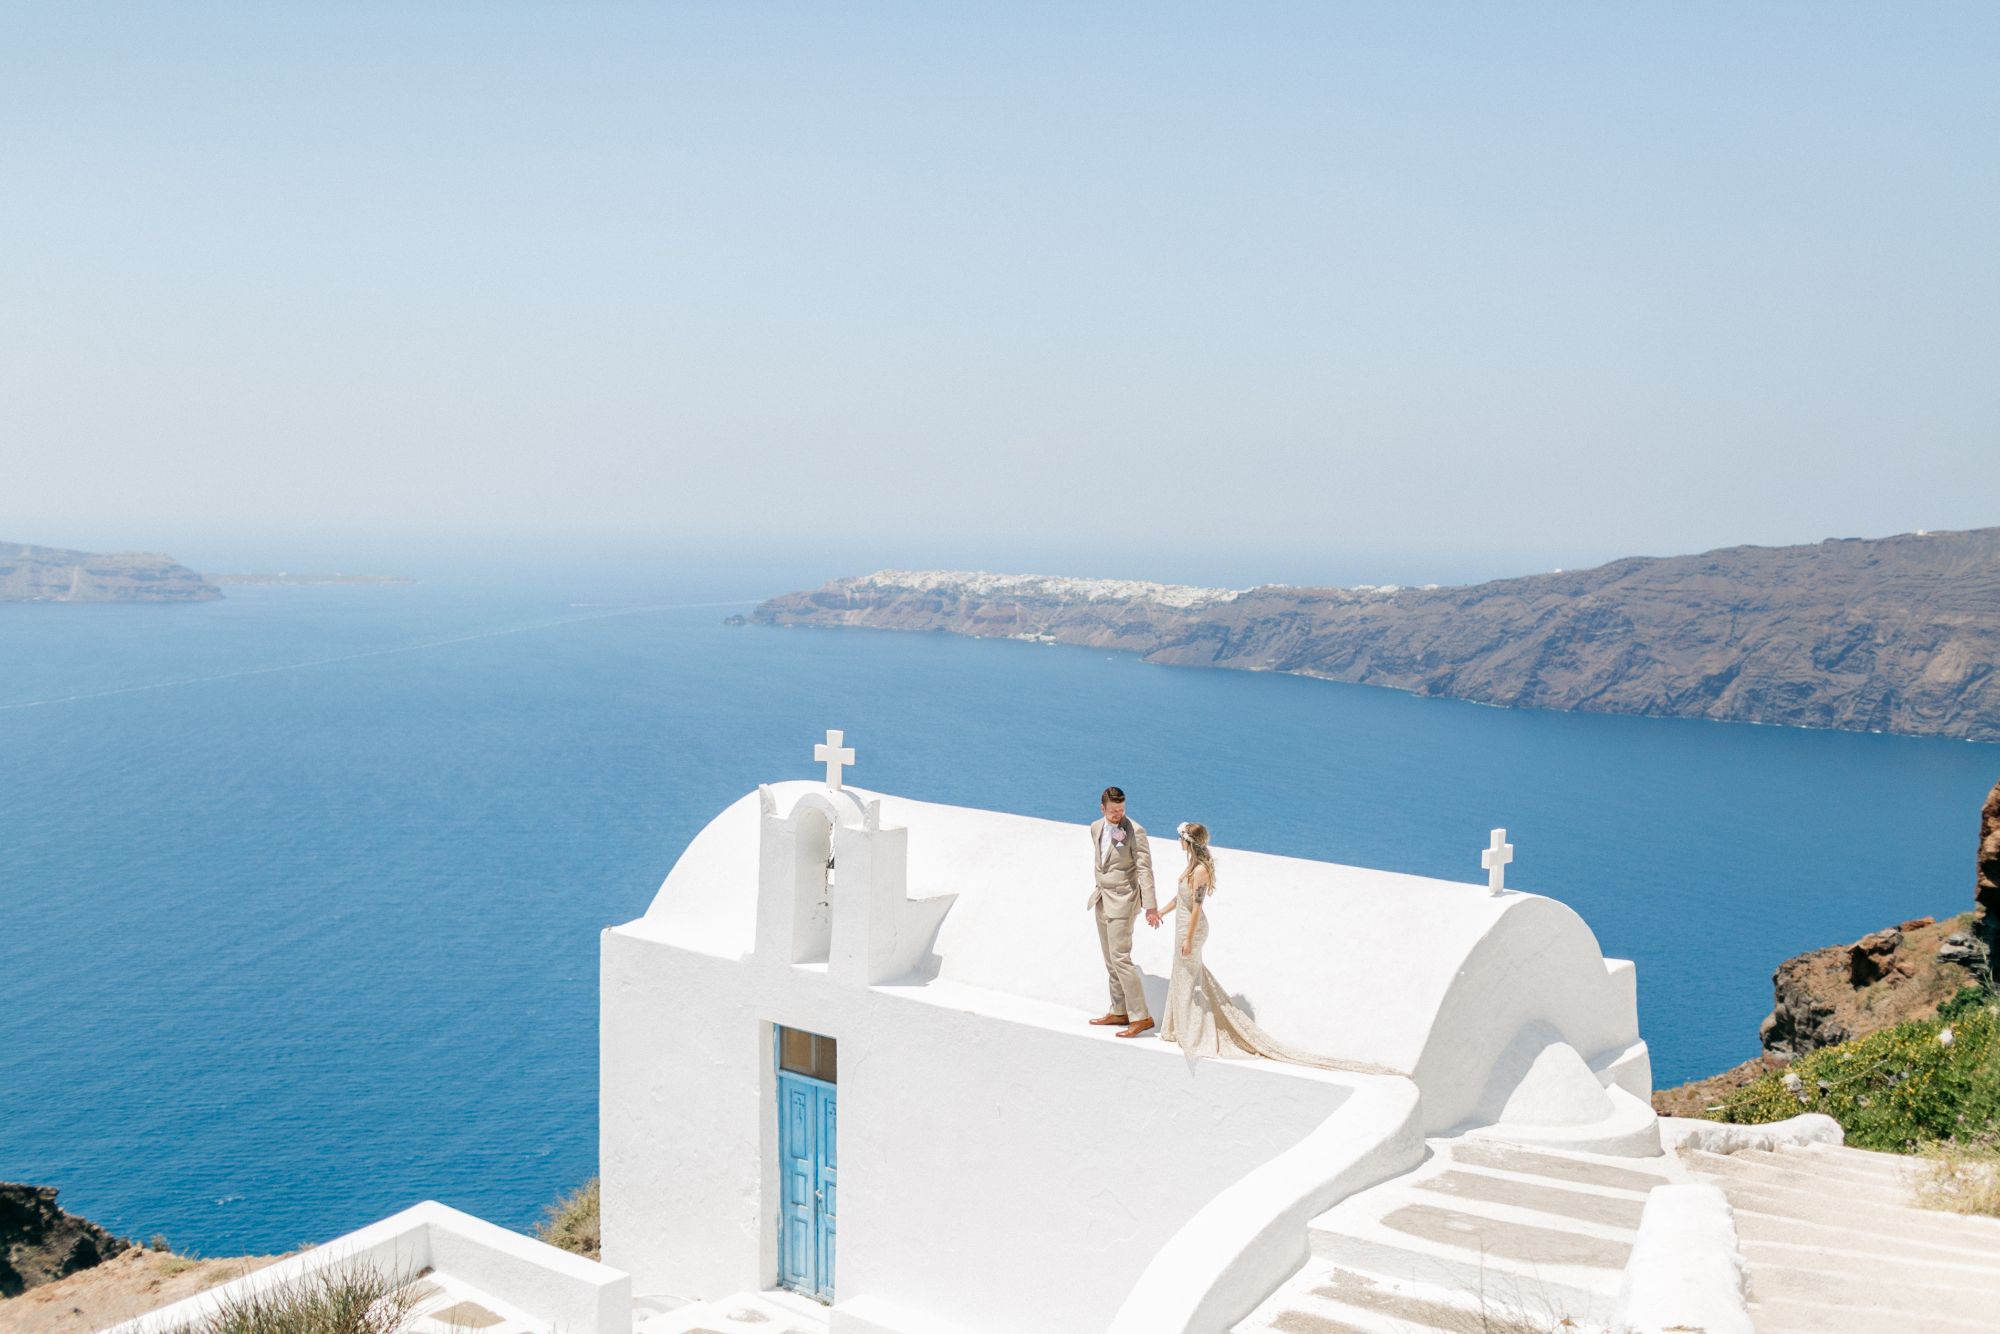 Newlywed couple atop church in Greece.